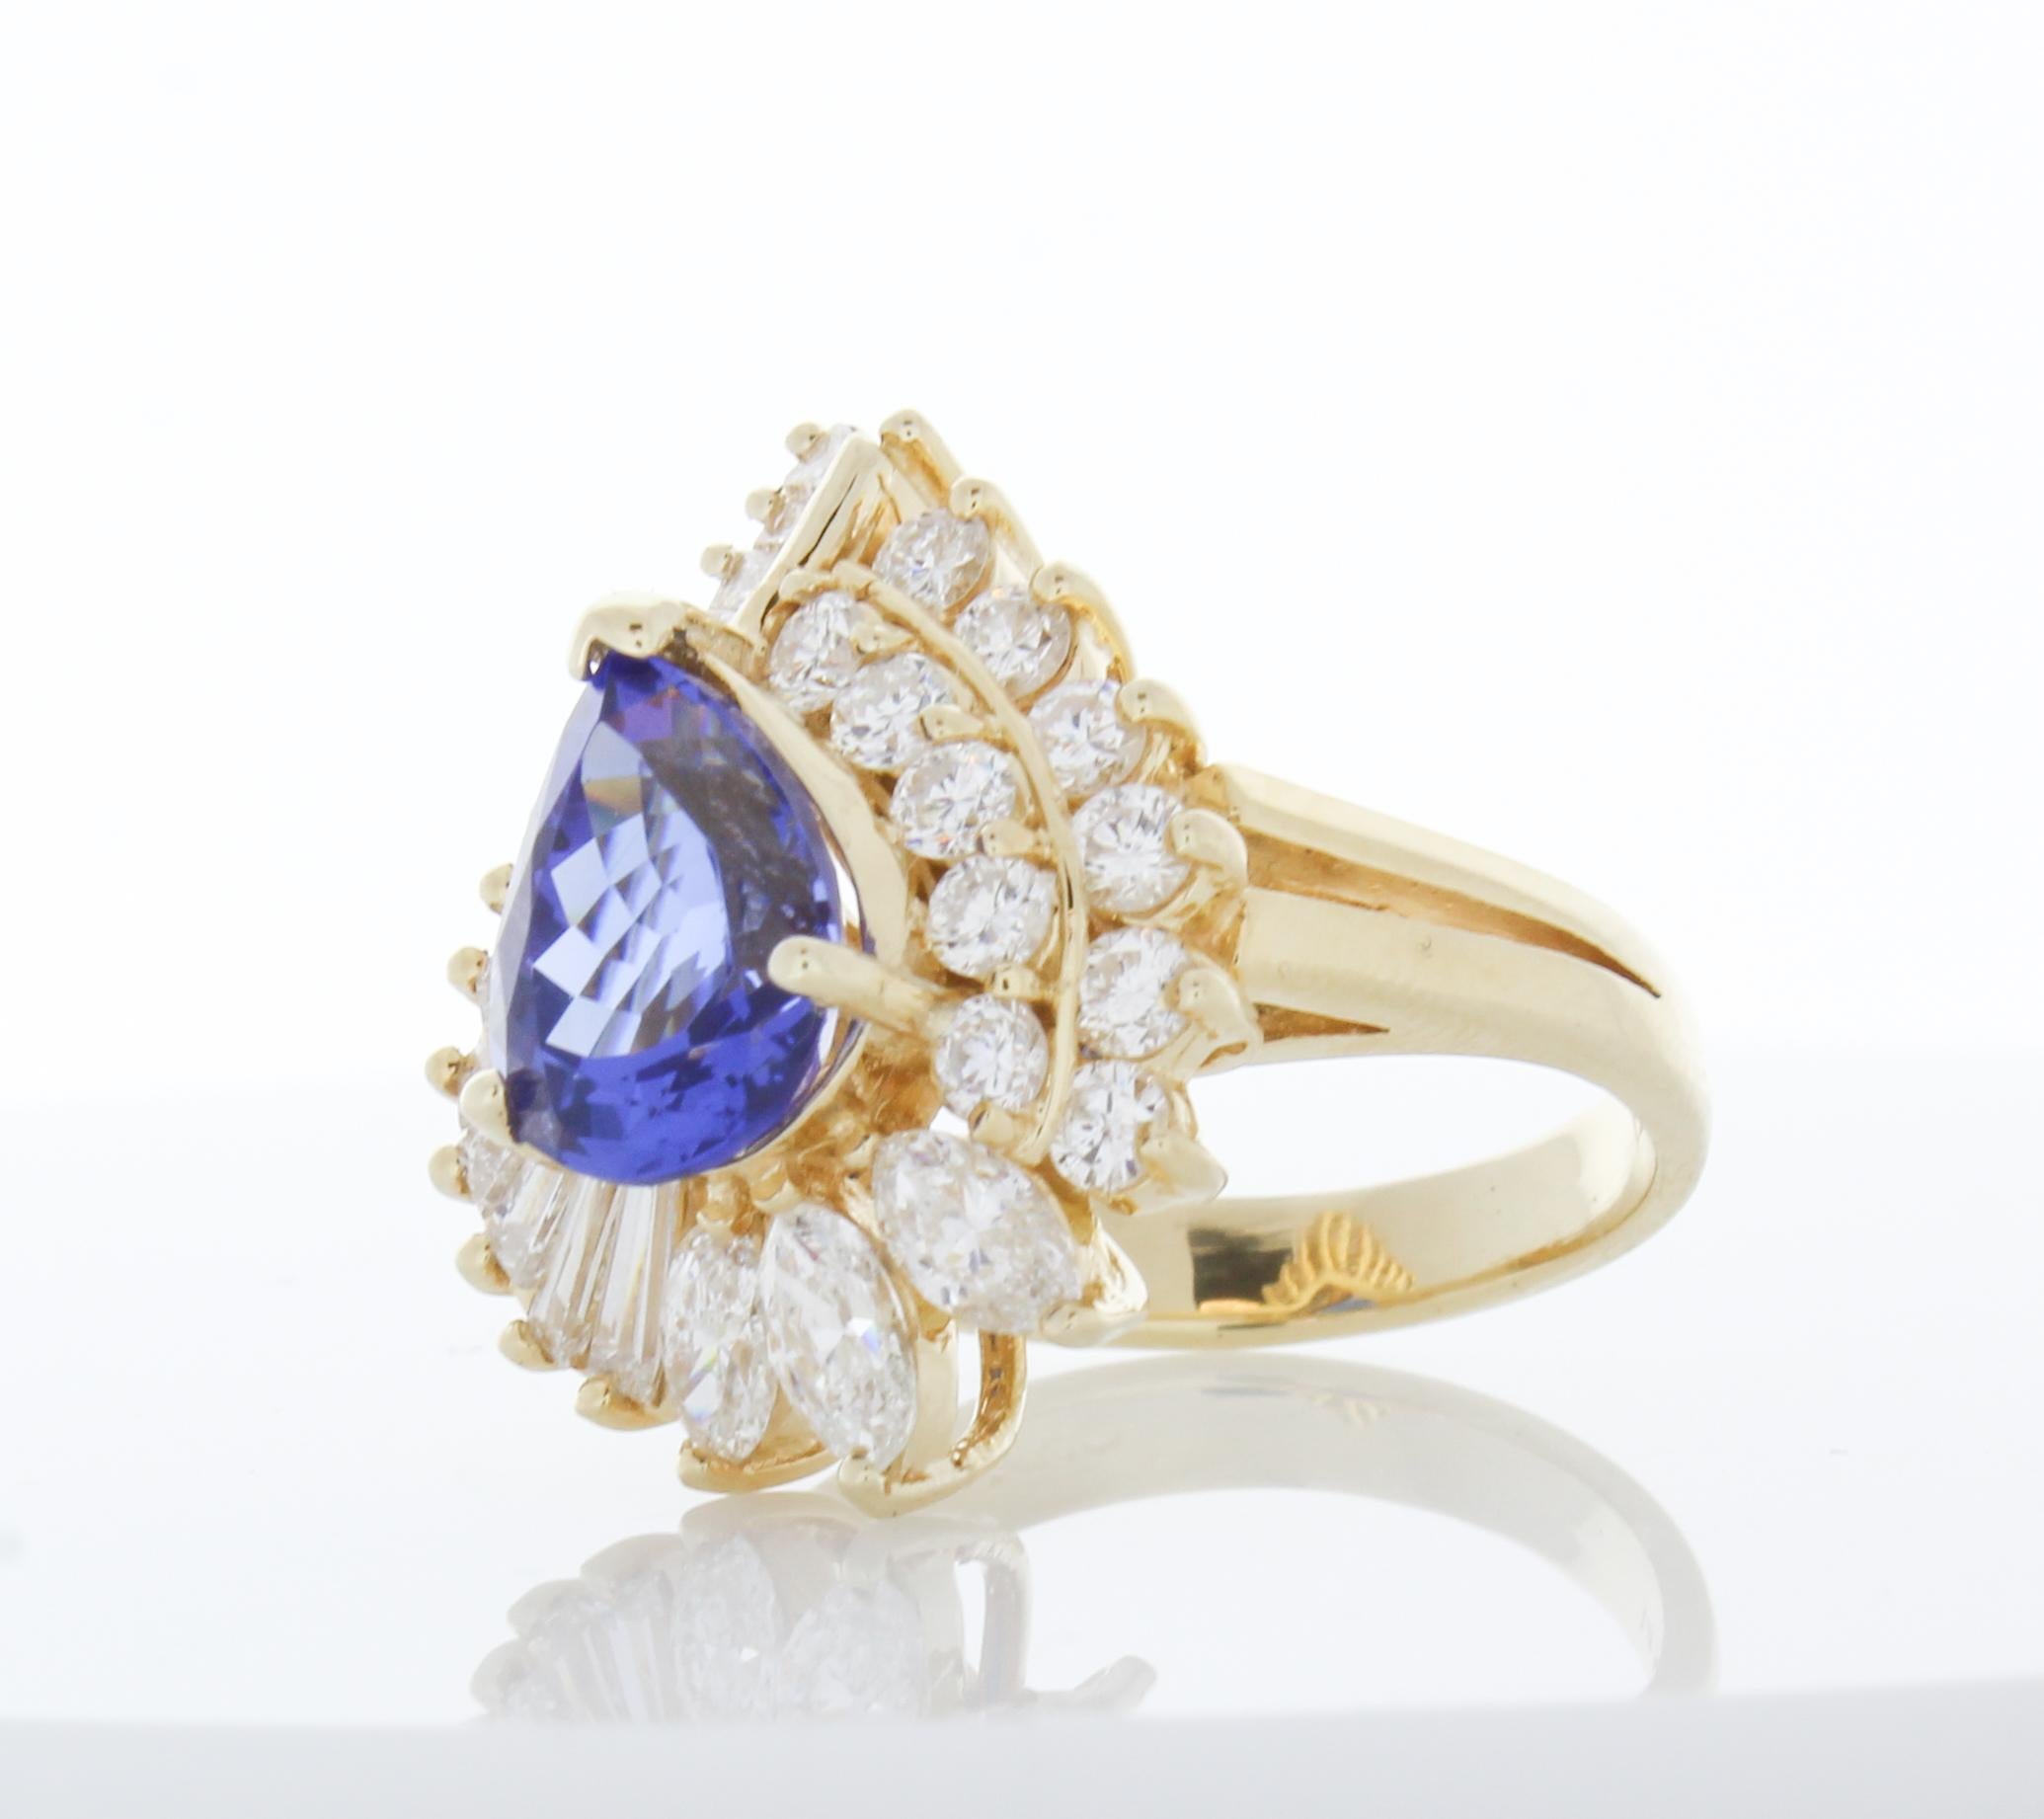 Contemporary 2.64 Carat Pear Shaped Tanzanite & Diamond Cocktail Ring in 14K Yellow Gold For Sale